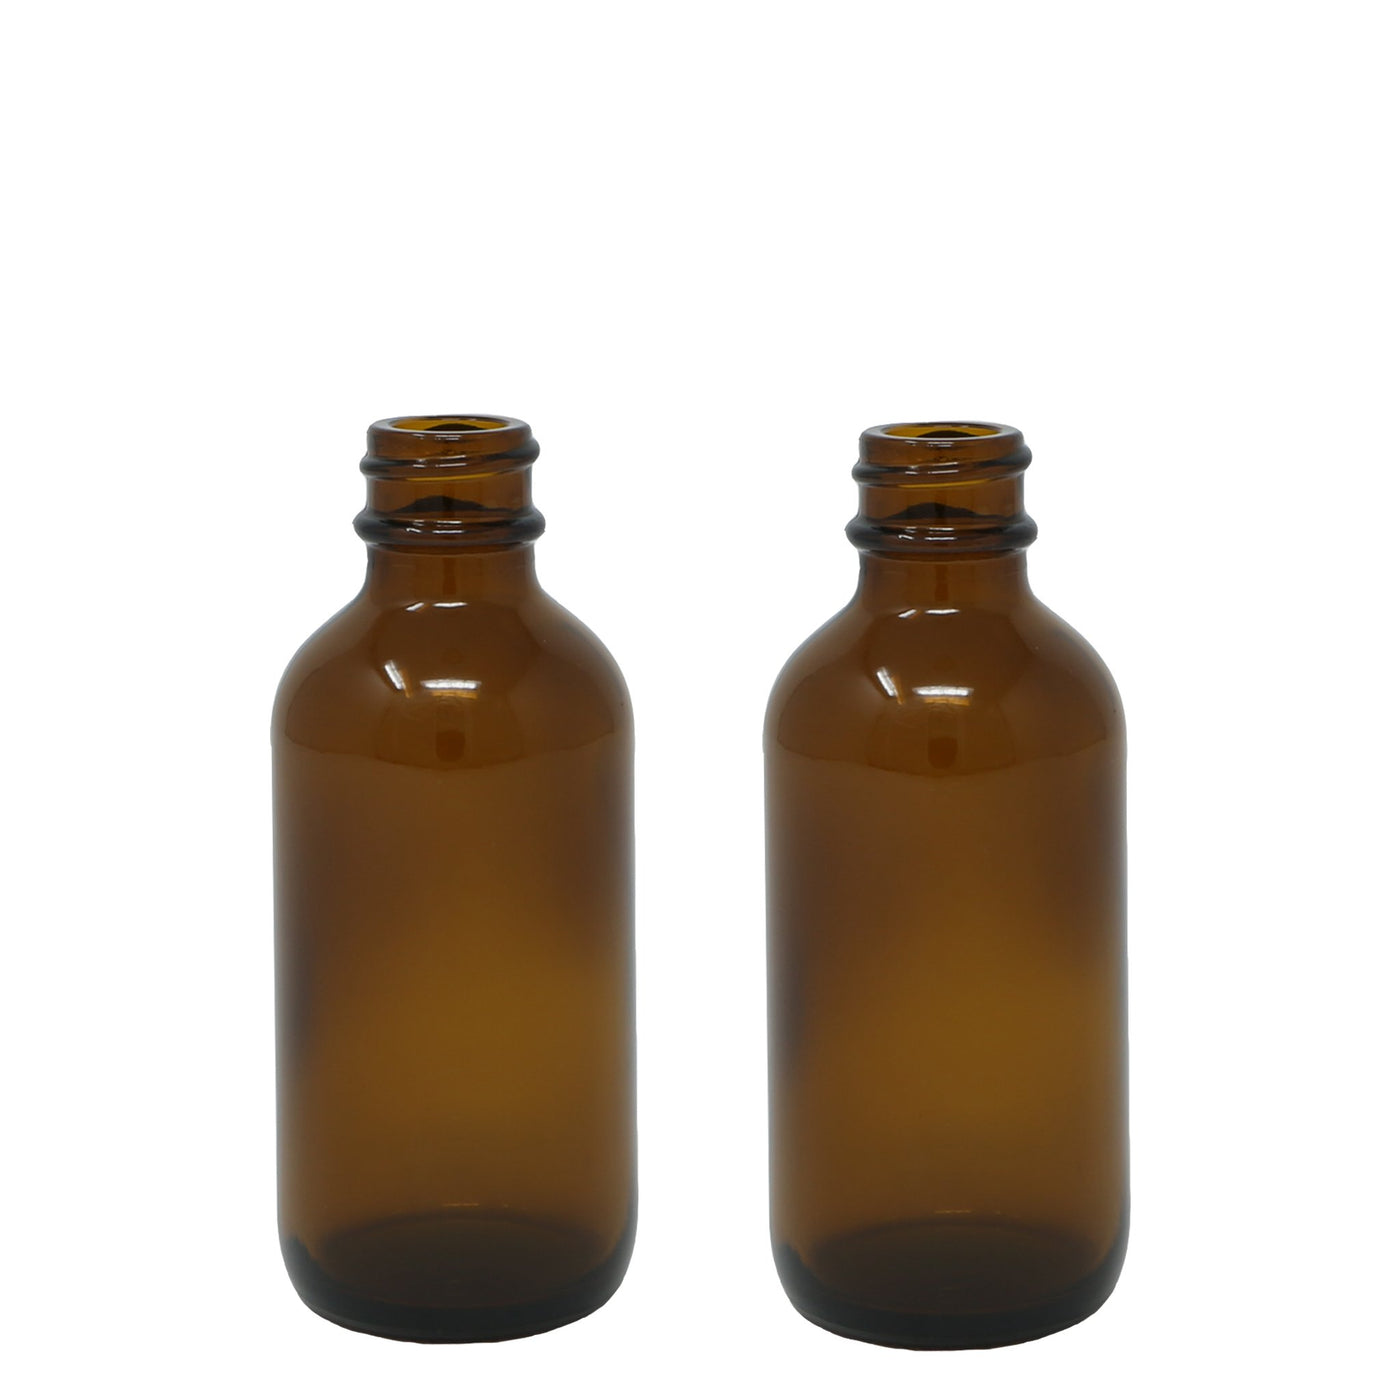 60ml (2oz) Amber Glass Boston Round Bottle Only - Oil Life Canada - Canada's Best Essential Oil Supplies